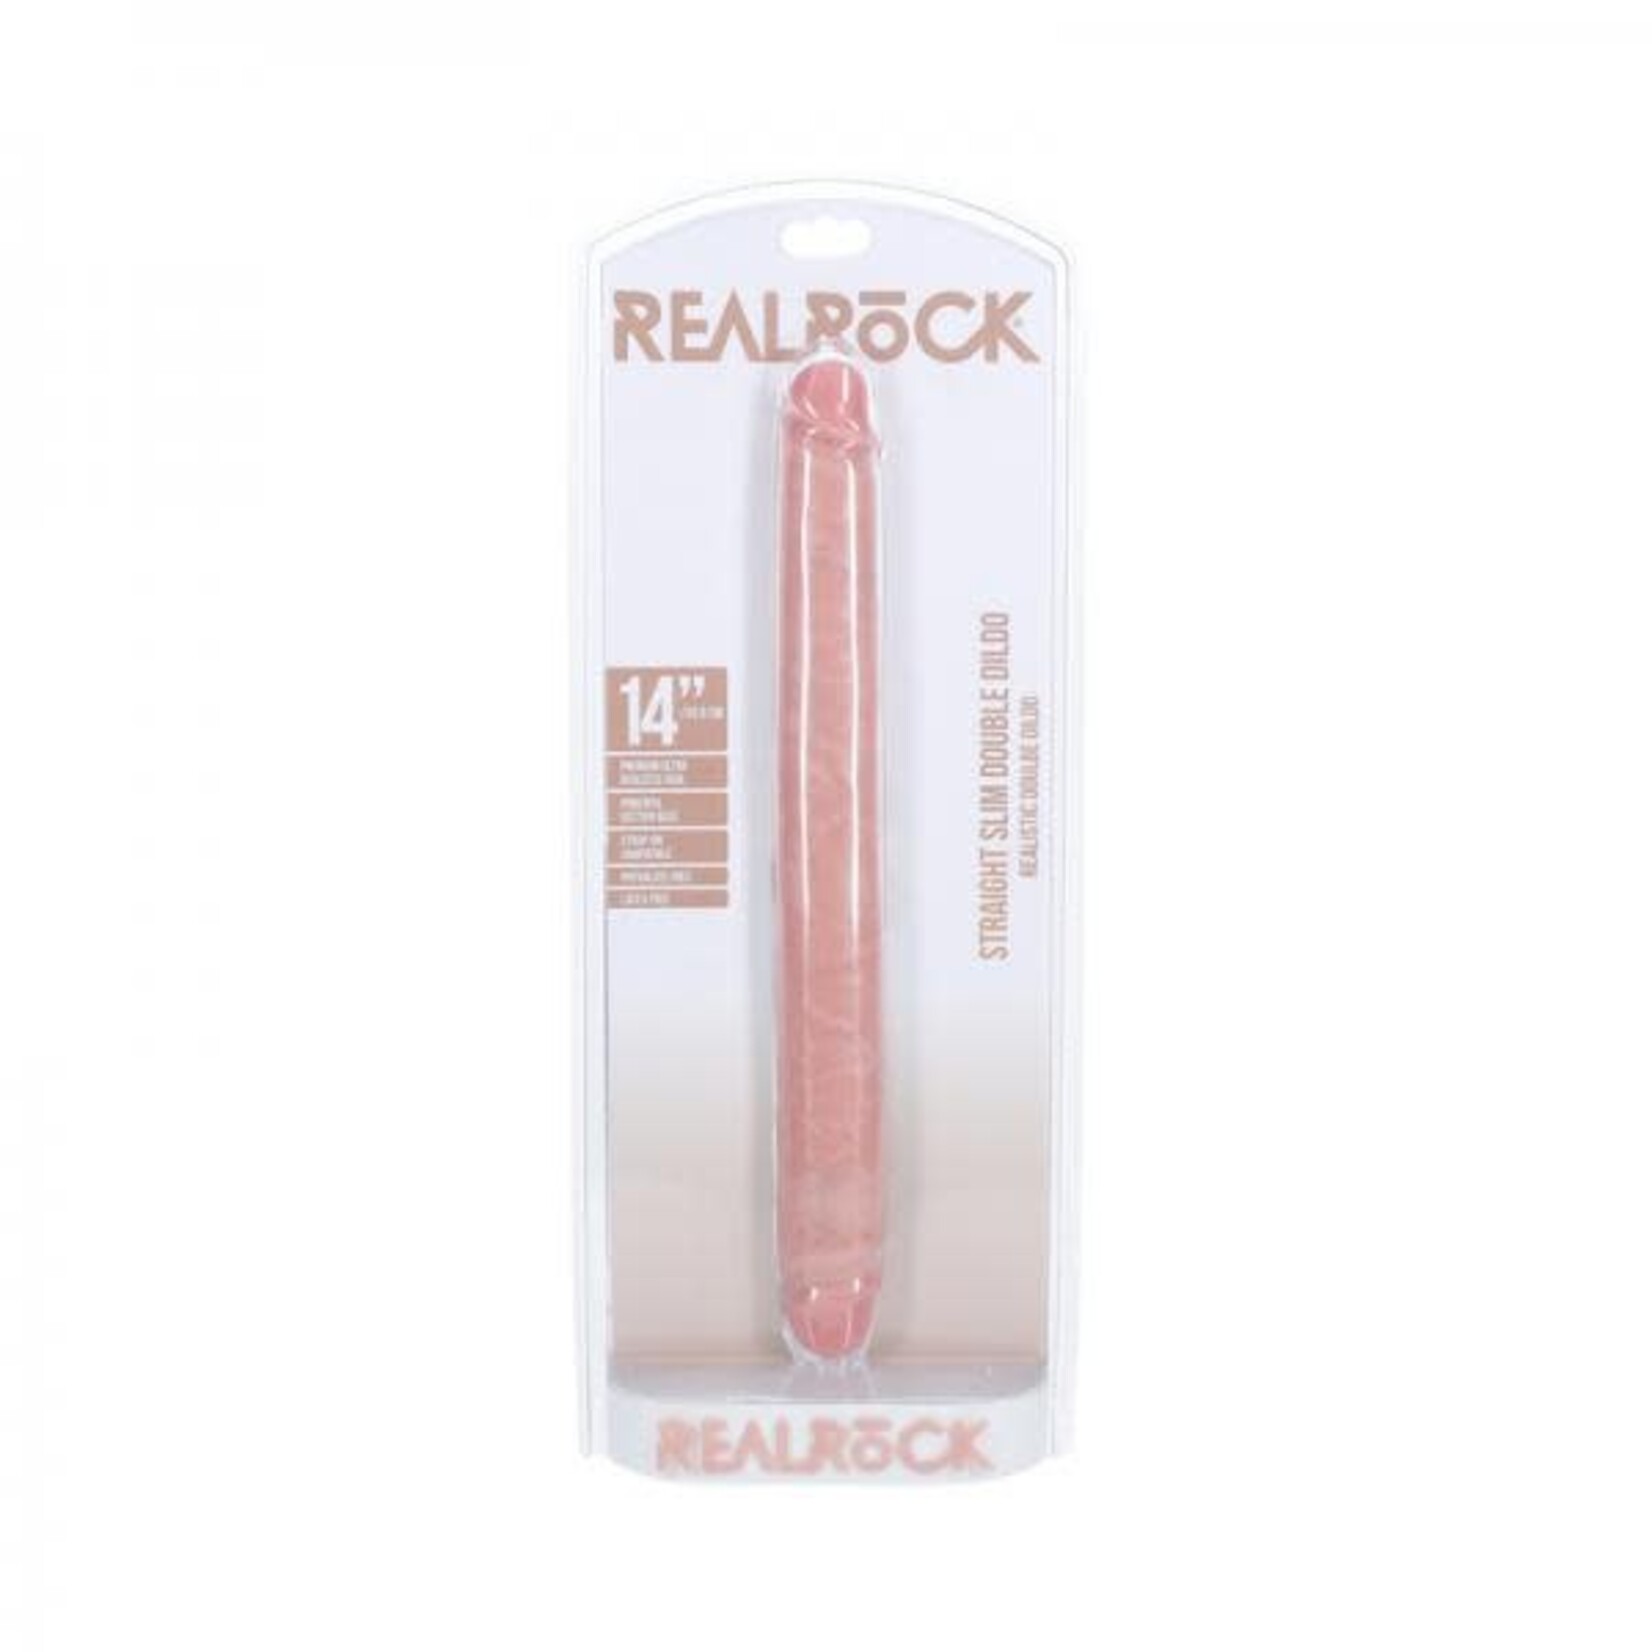 SHOTS REALROCK SLIM DOUBLE ENDED 14 INCH DILDO IN LIGHT